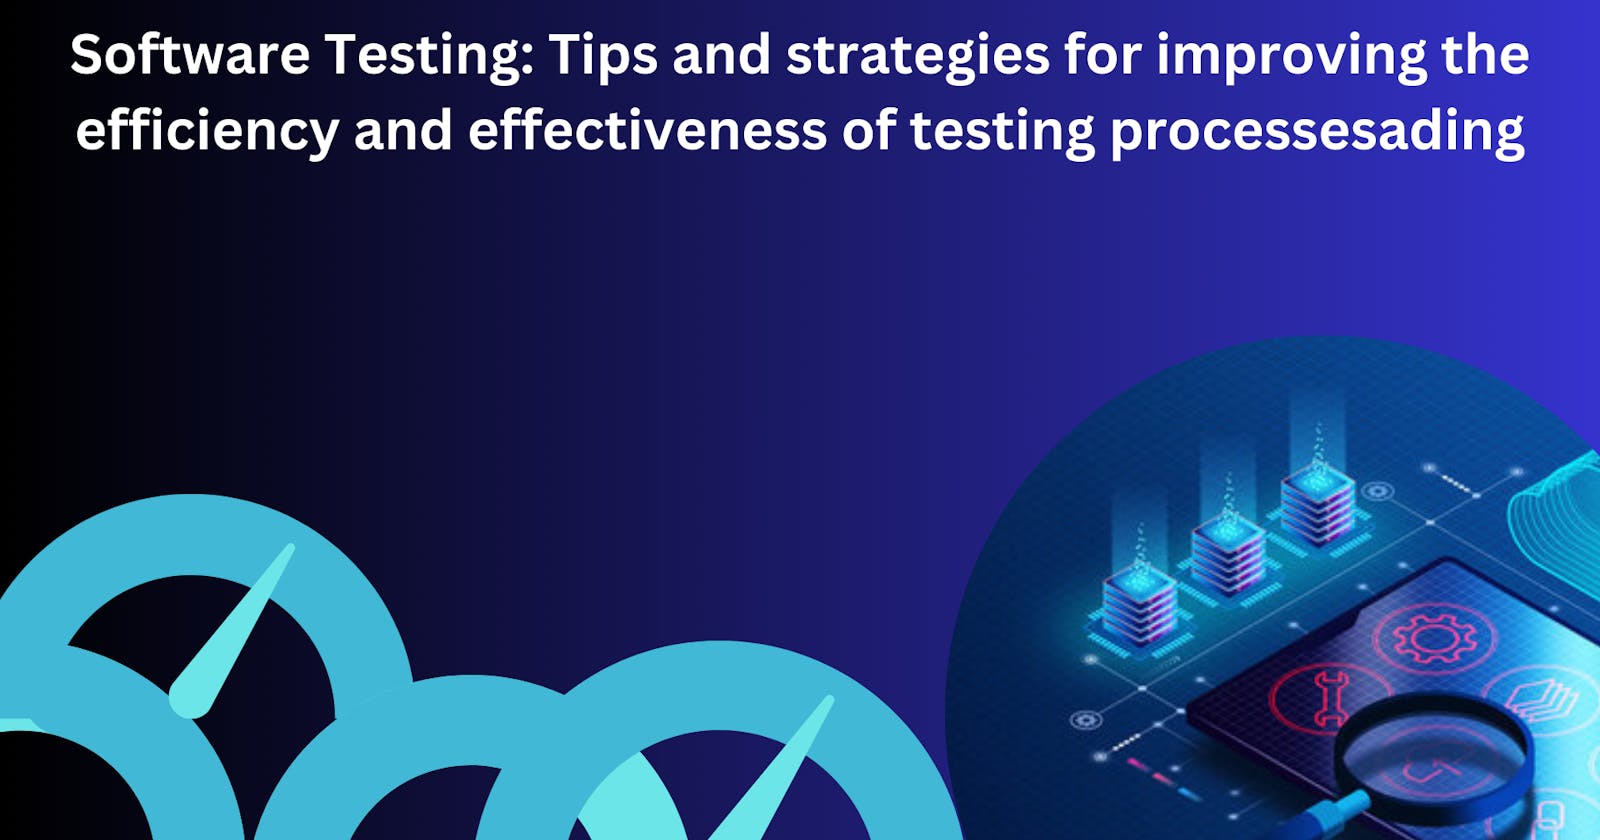 Software Testing: Tips and strategies for improving the efficiency and effectiveness of testing processes